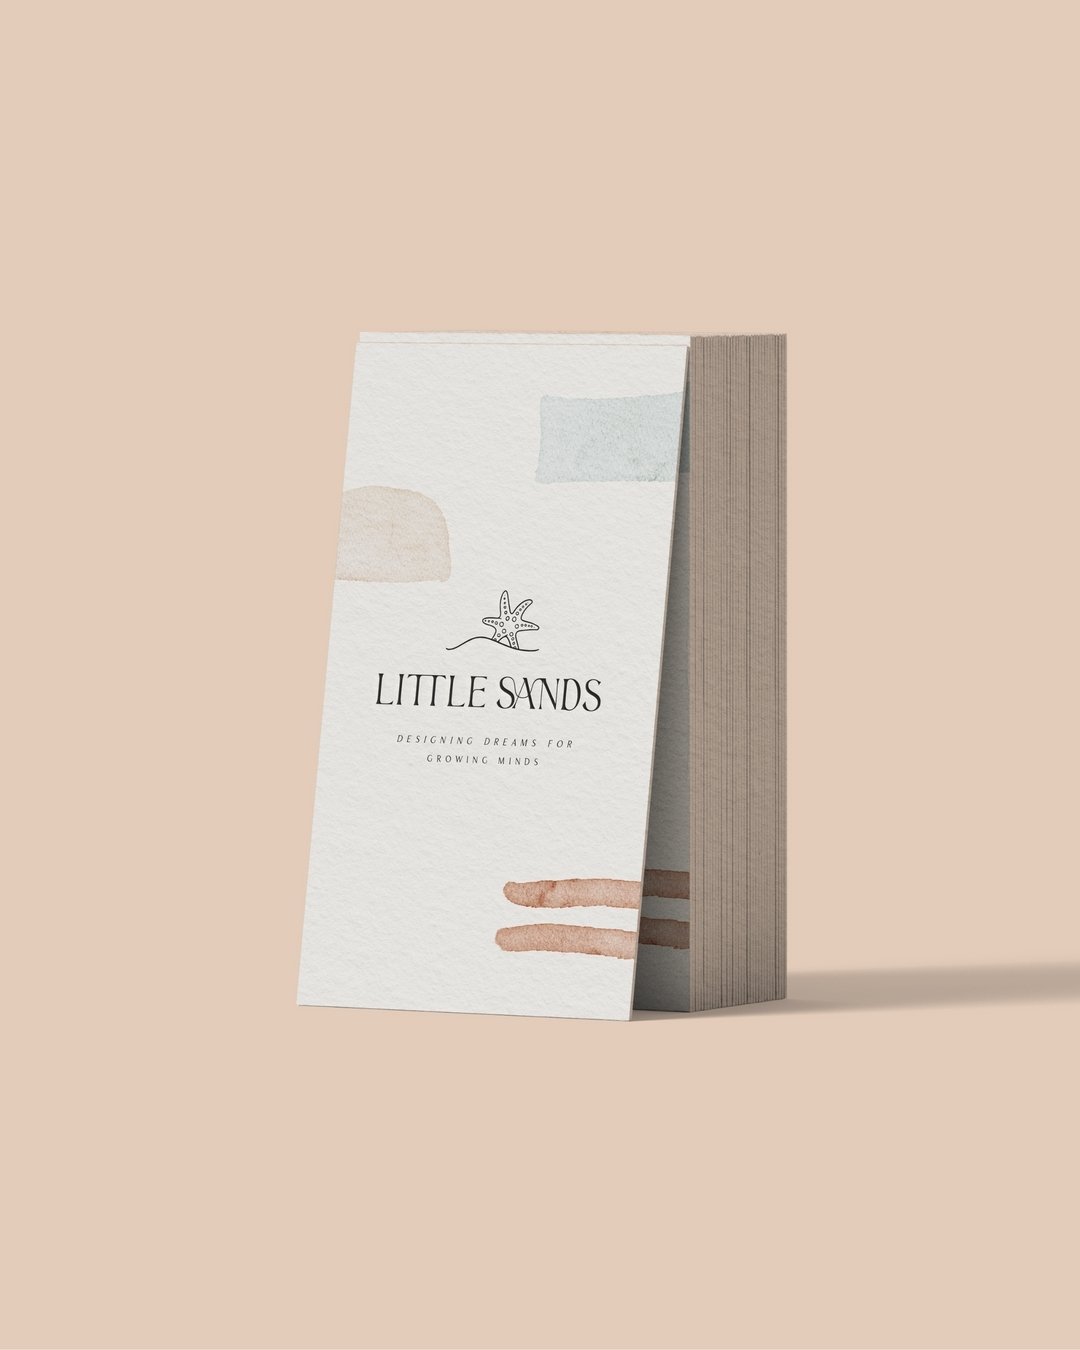 Adding a touch of playful charm to everyday essentials! 

These business cards for Little Sands are anything but ordinary. ✨  We designed a unique, off-centered layout for the back, featuring hand-drawn shapes and playful text that perfectly compleme